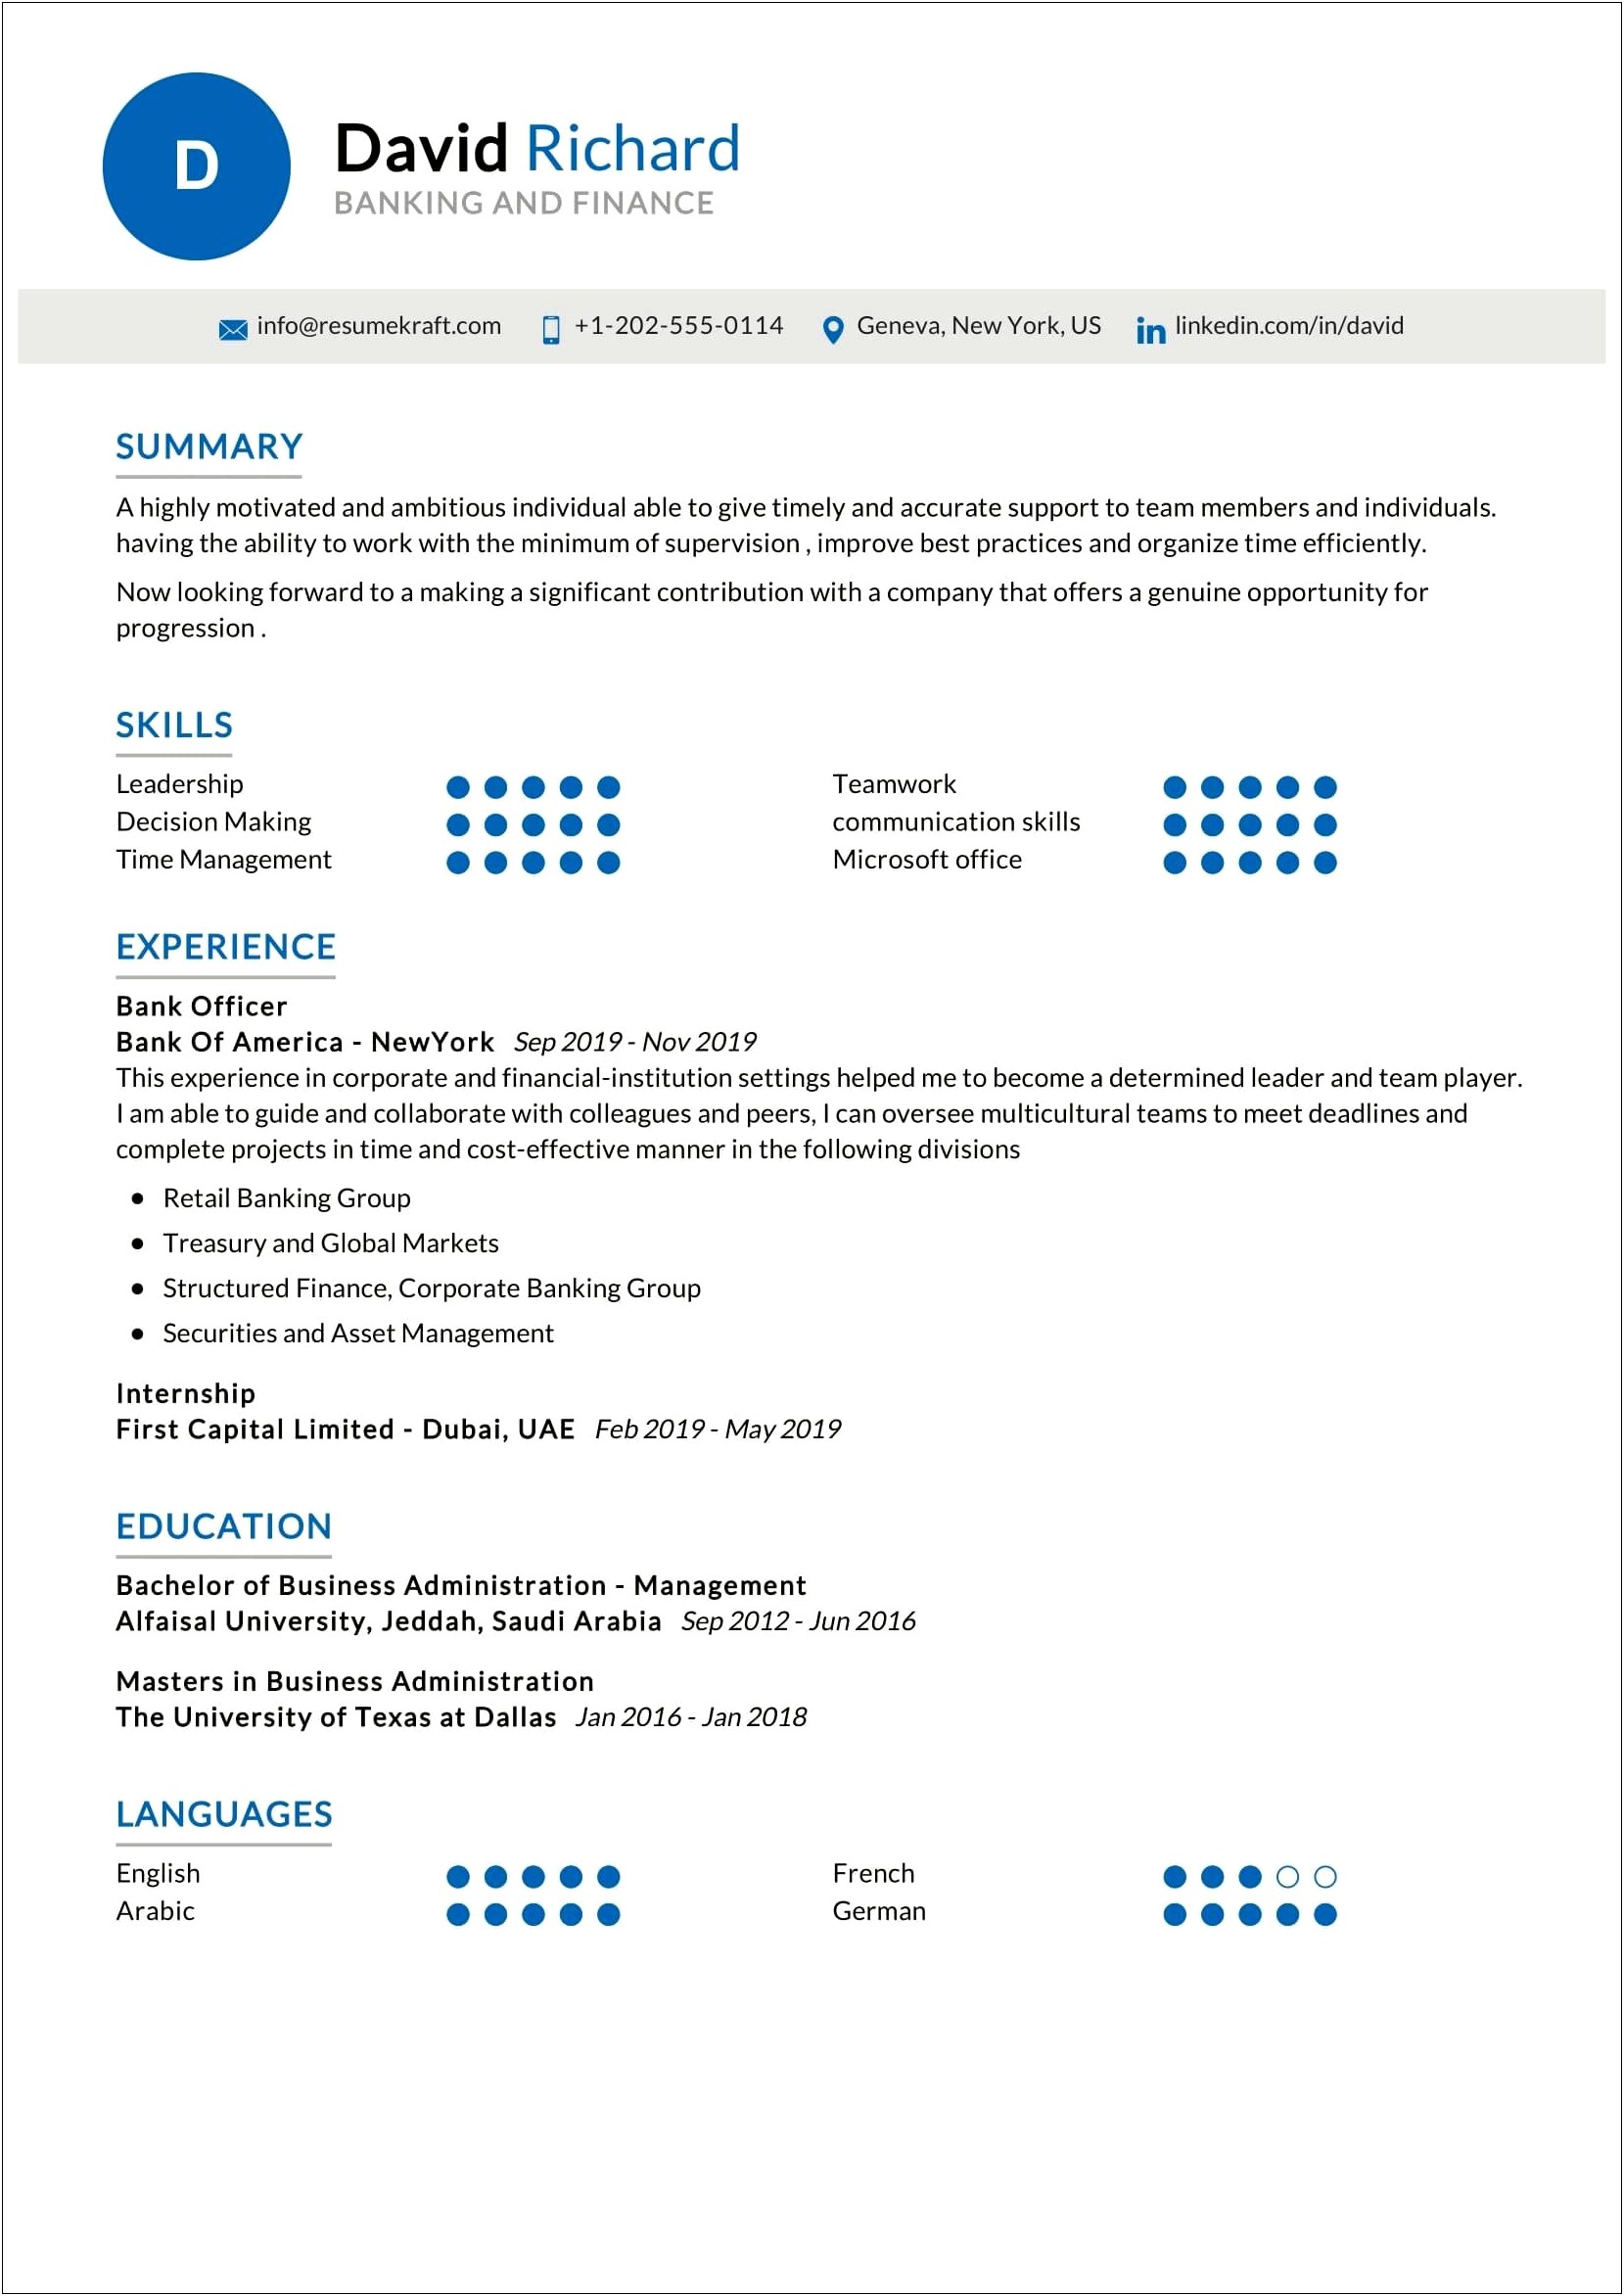 Exmple Resume Of Bank Product Manager